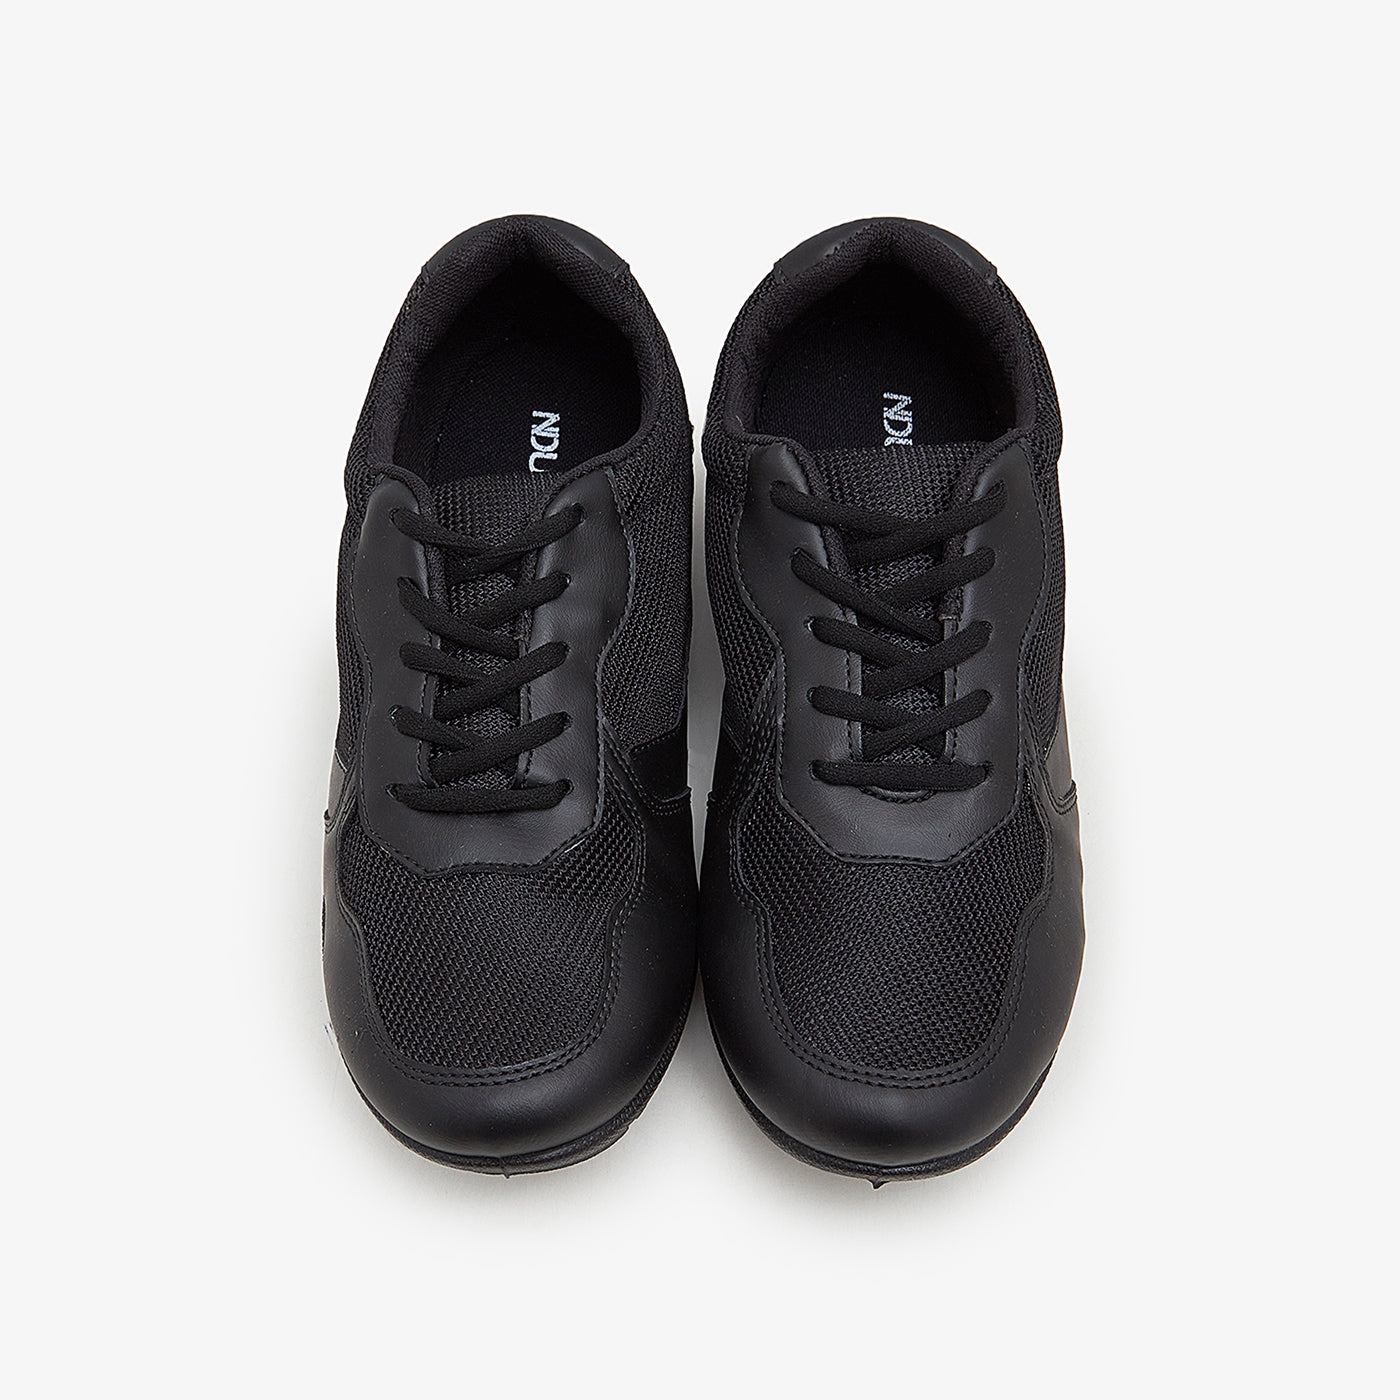 Men's Basic Lace-up Sneakers